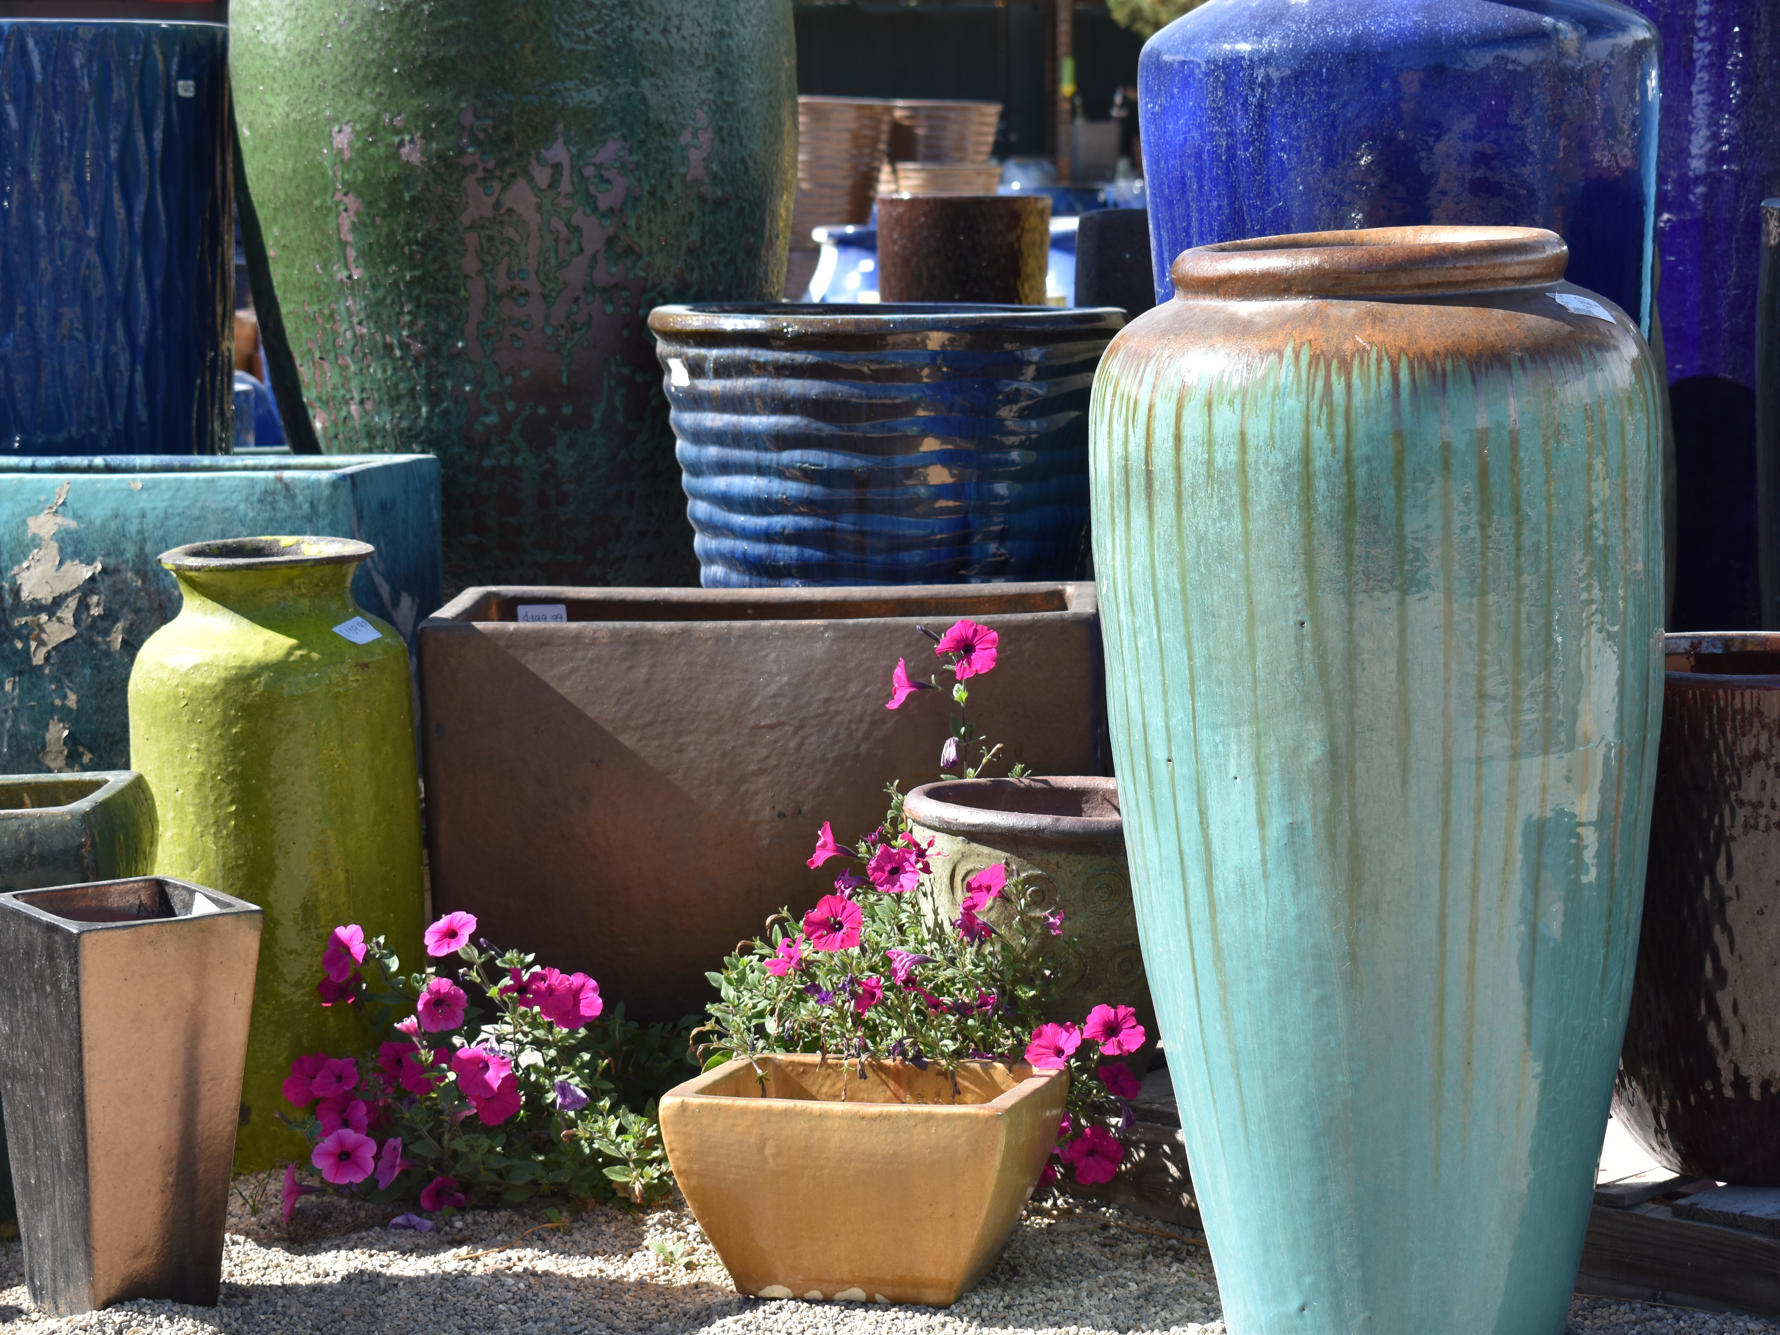 A collection of pottery at Botanicals Sandy retail location